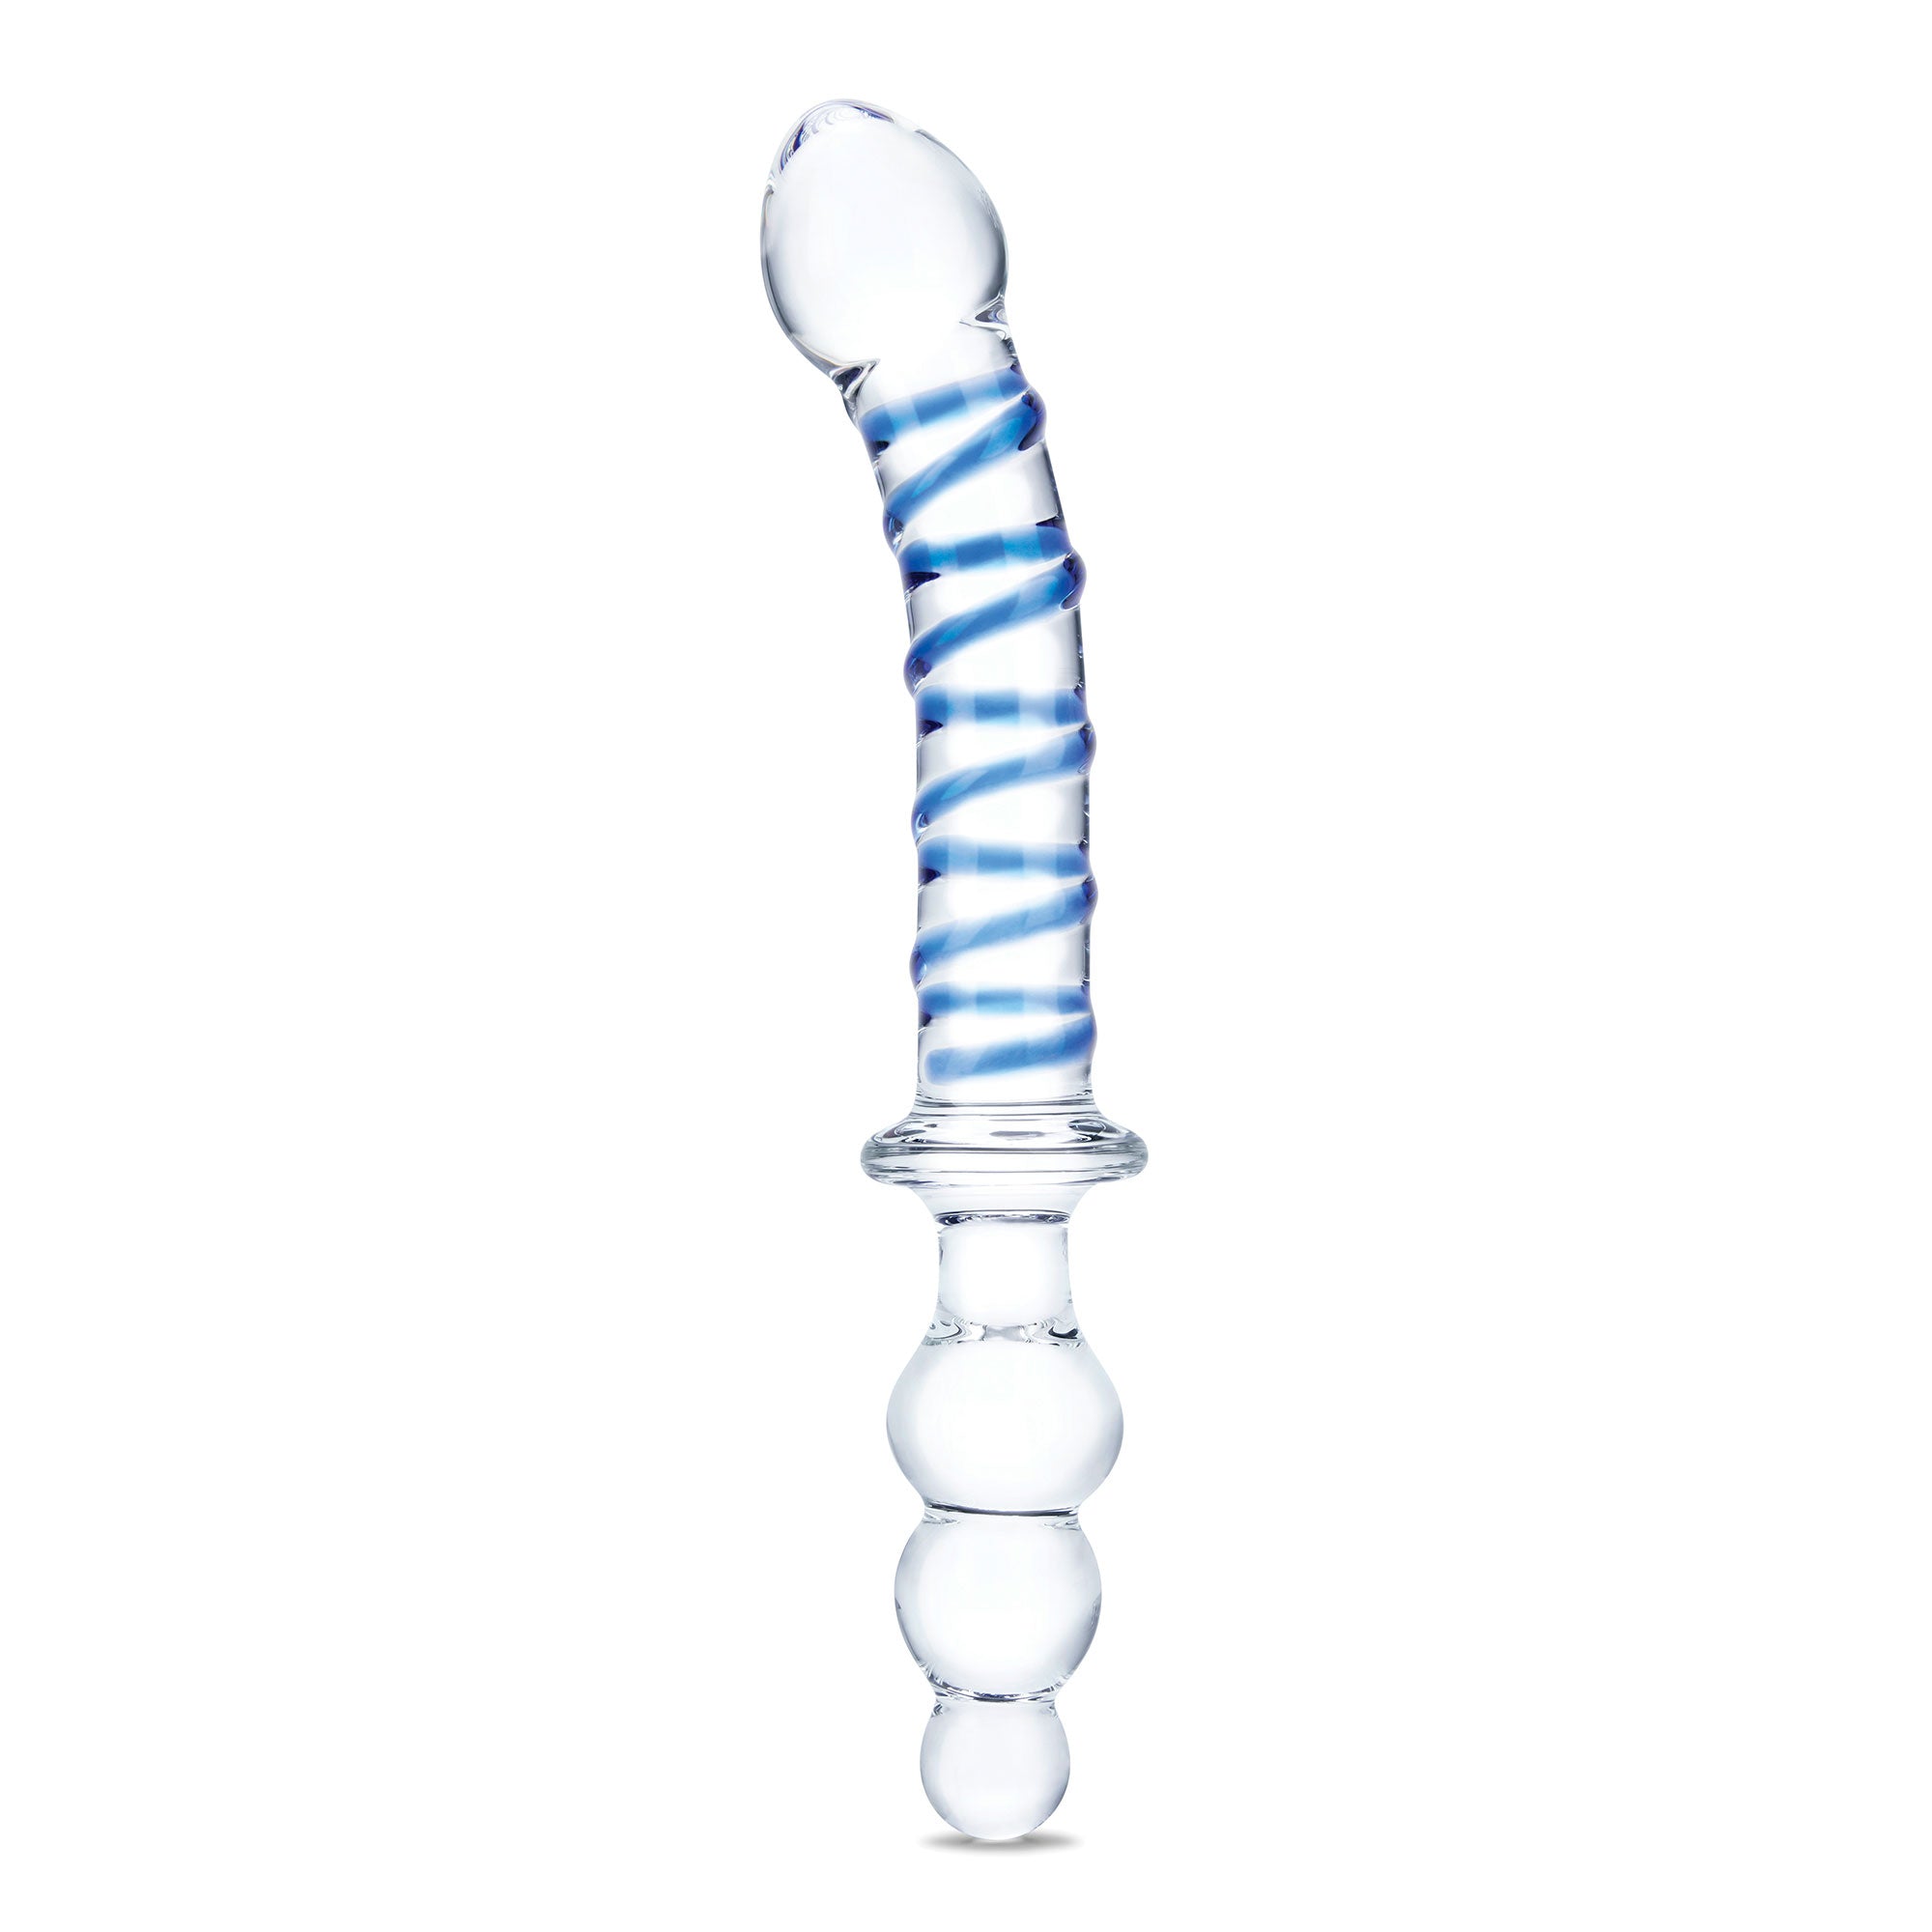 10 Inch Twister Dual-Ended Dildo - Clear/blue-5